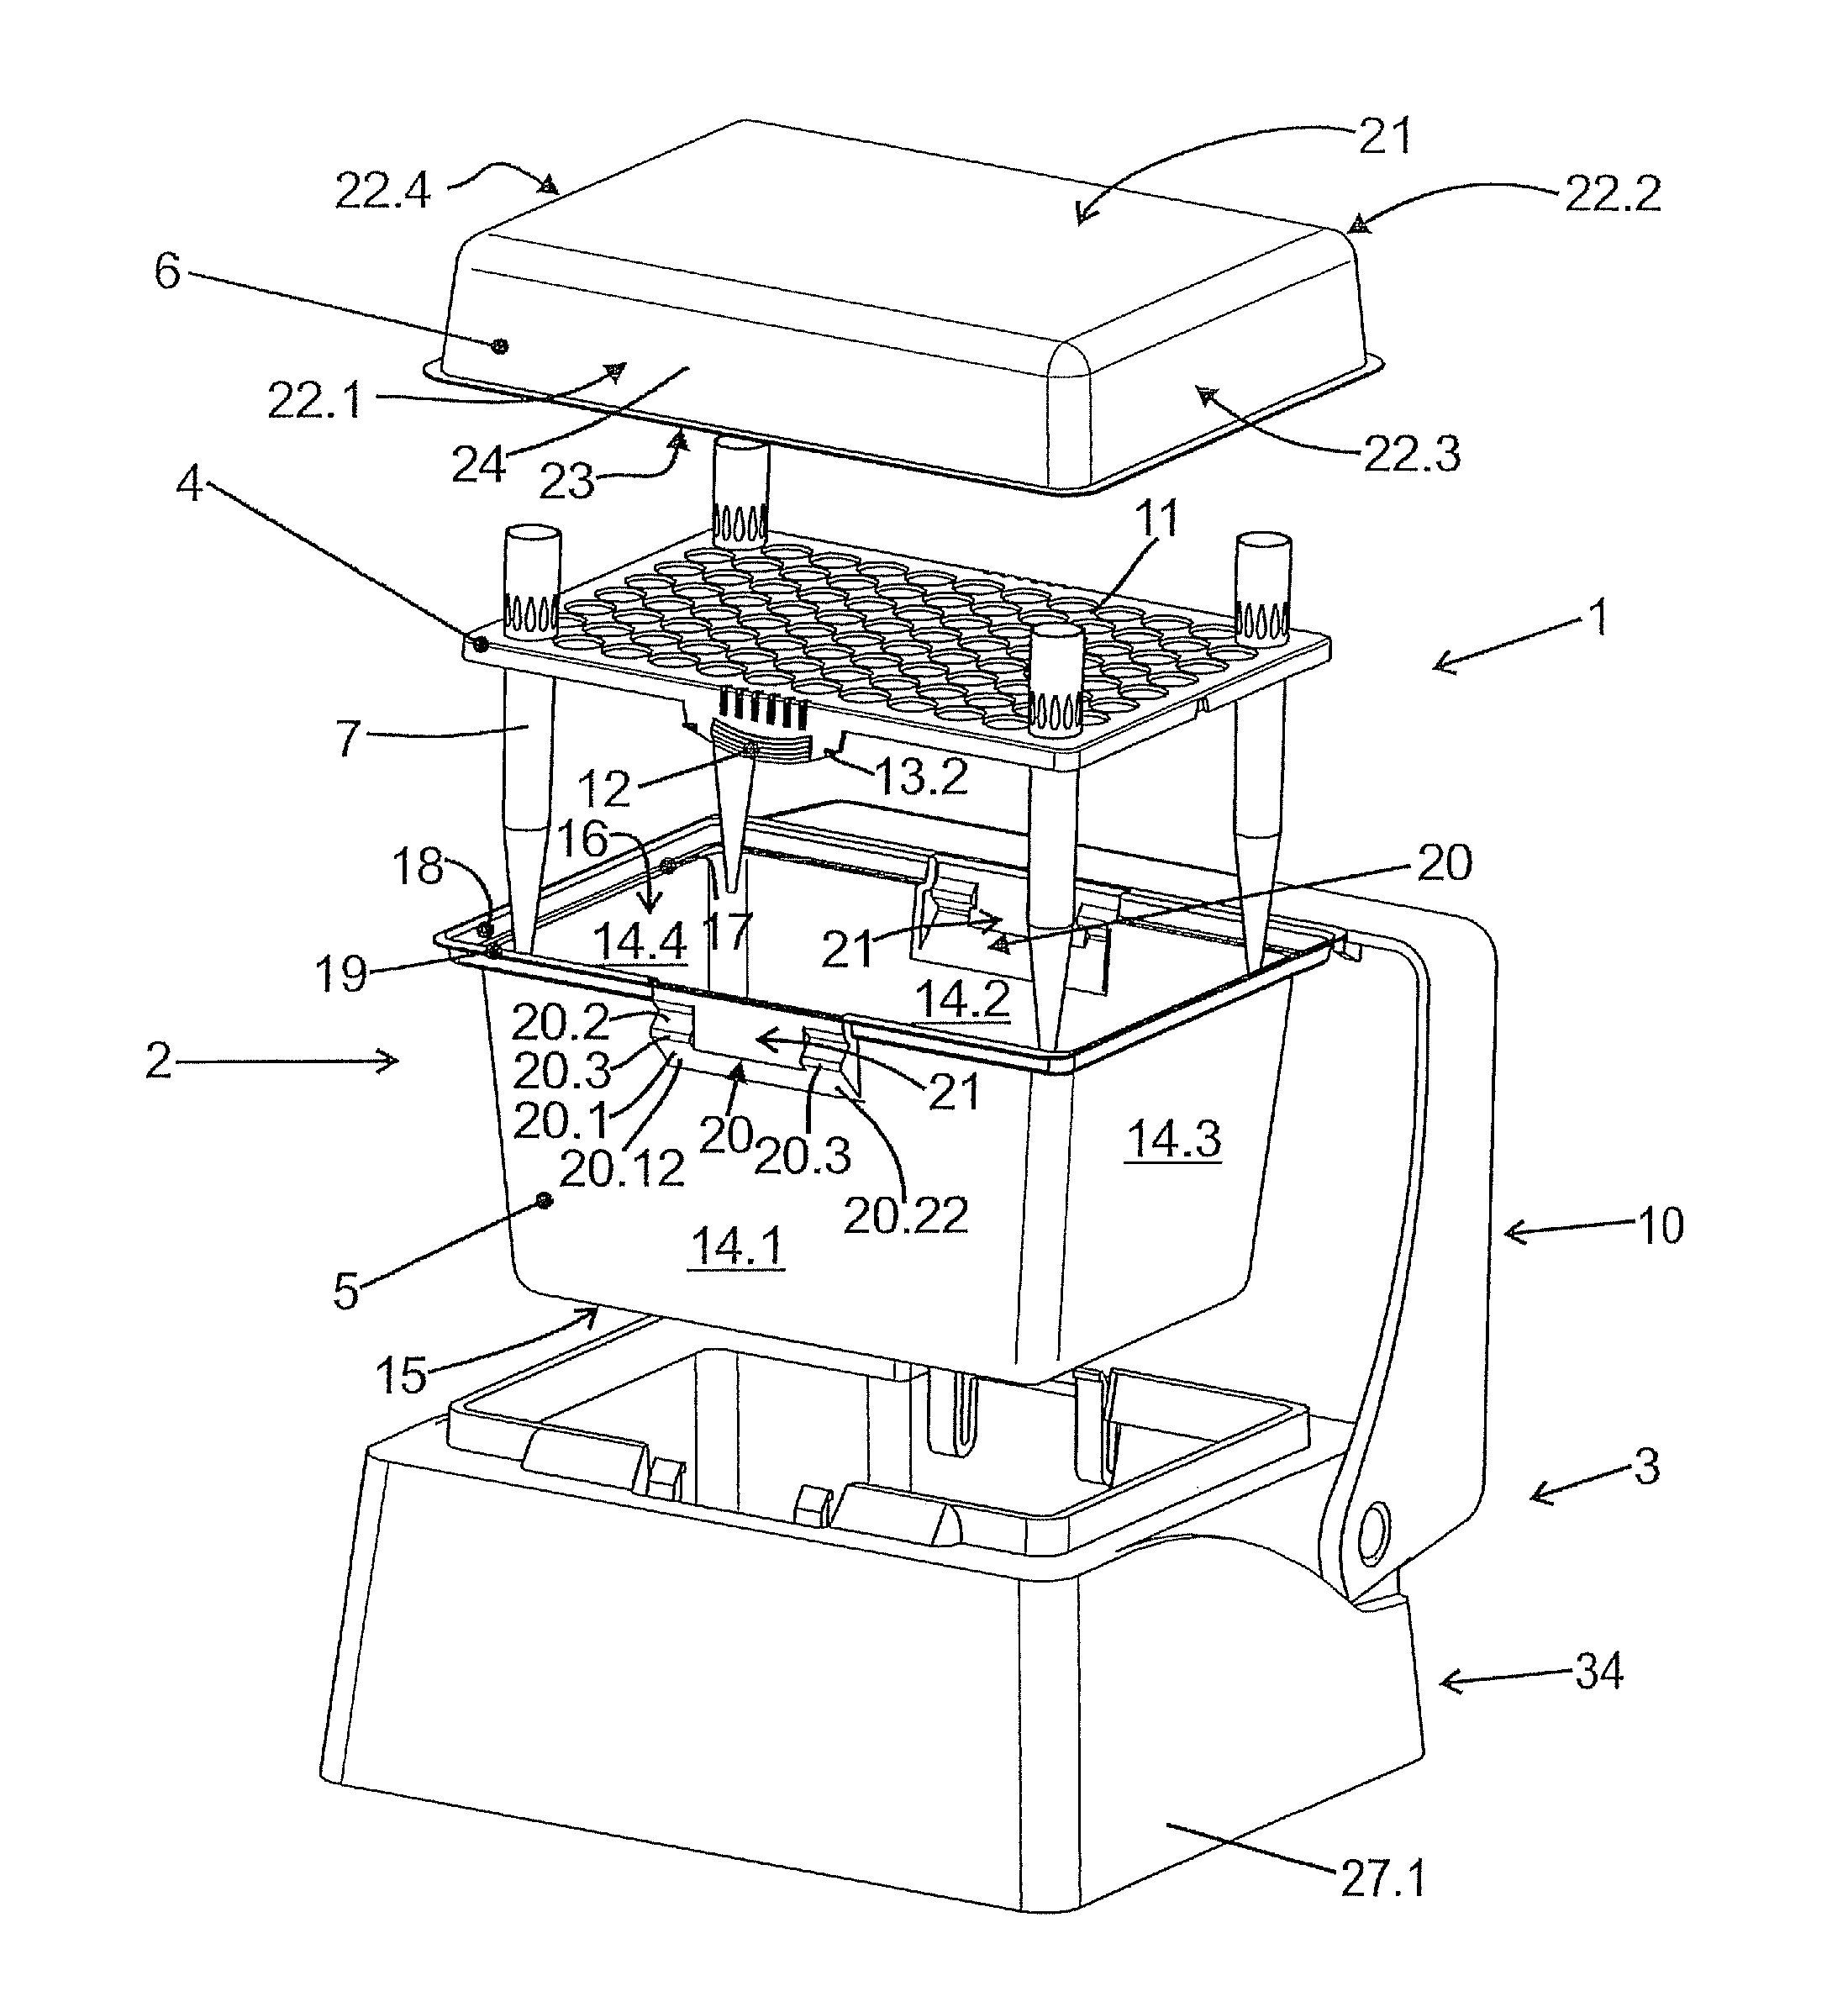 Device for providing pipette tips